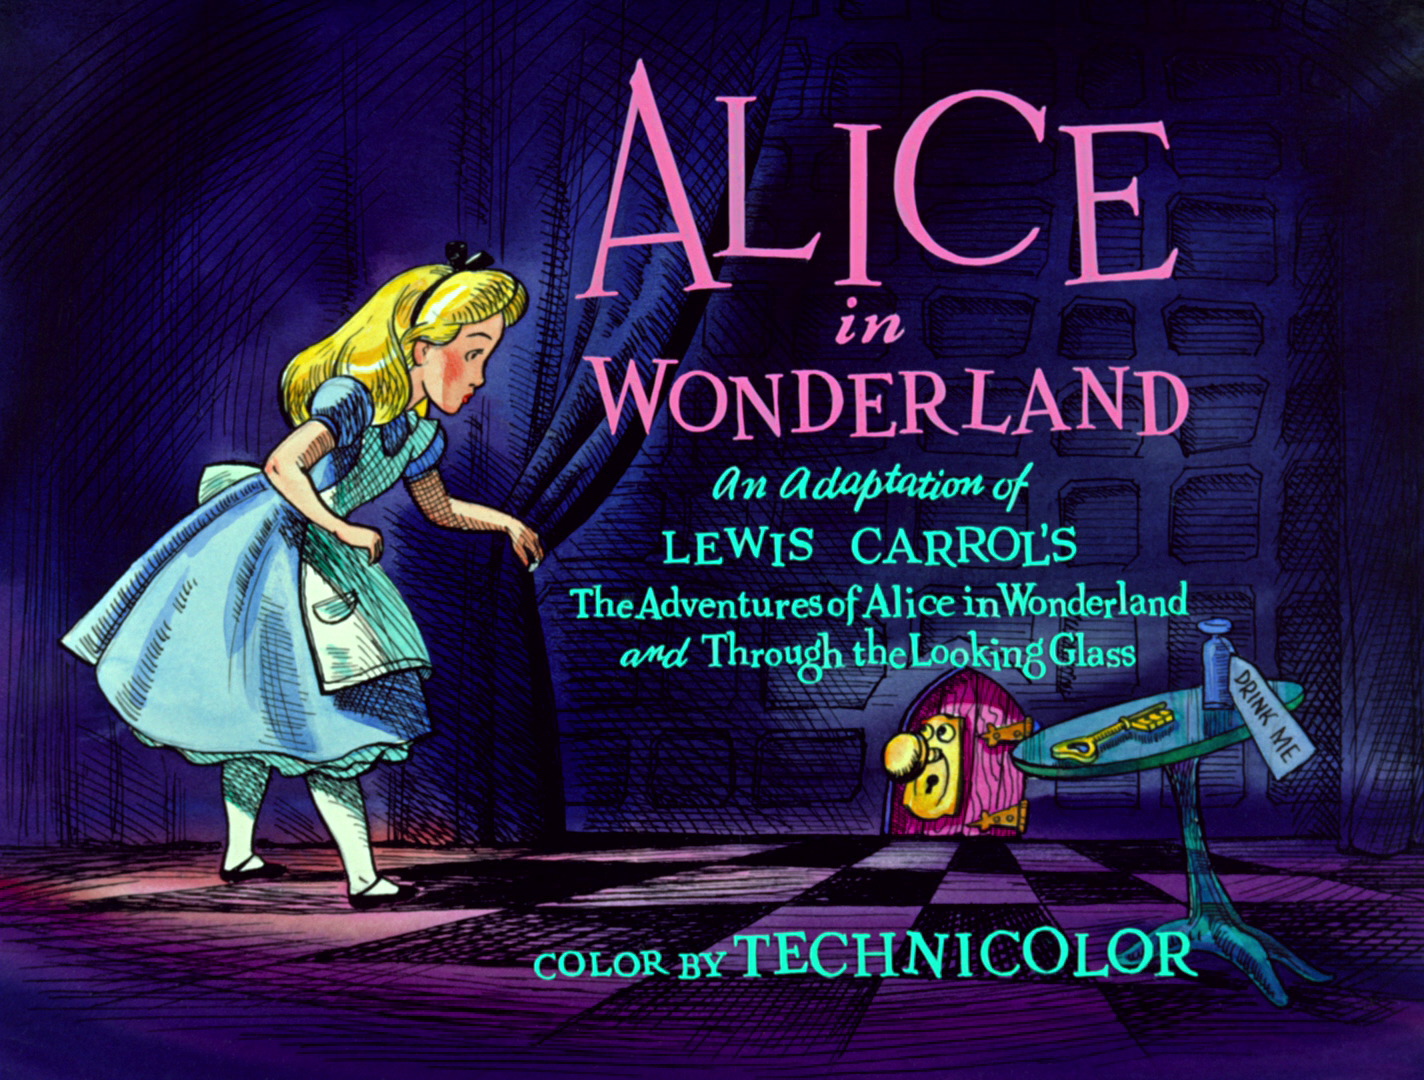 Alice in Wonderland - song and lyrics by YOUNGRAB